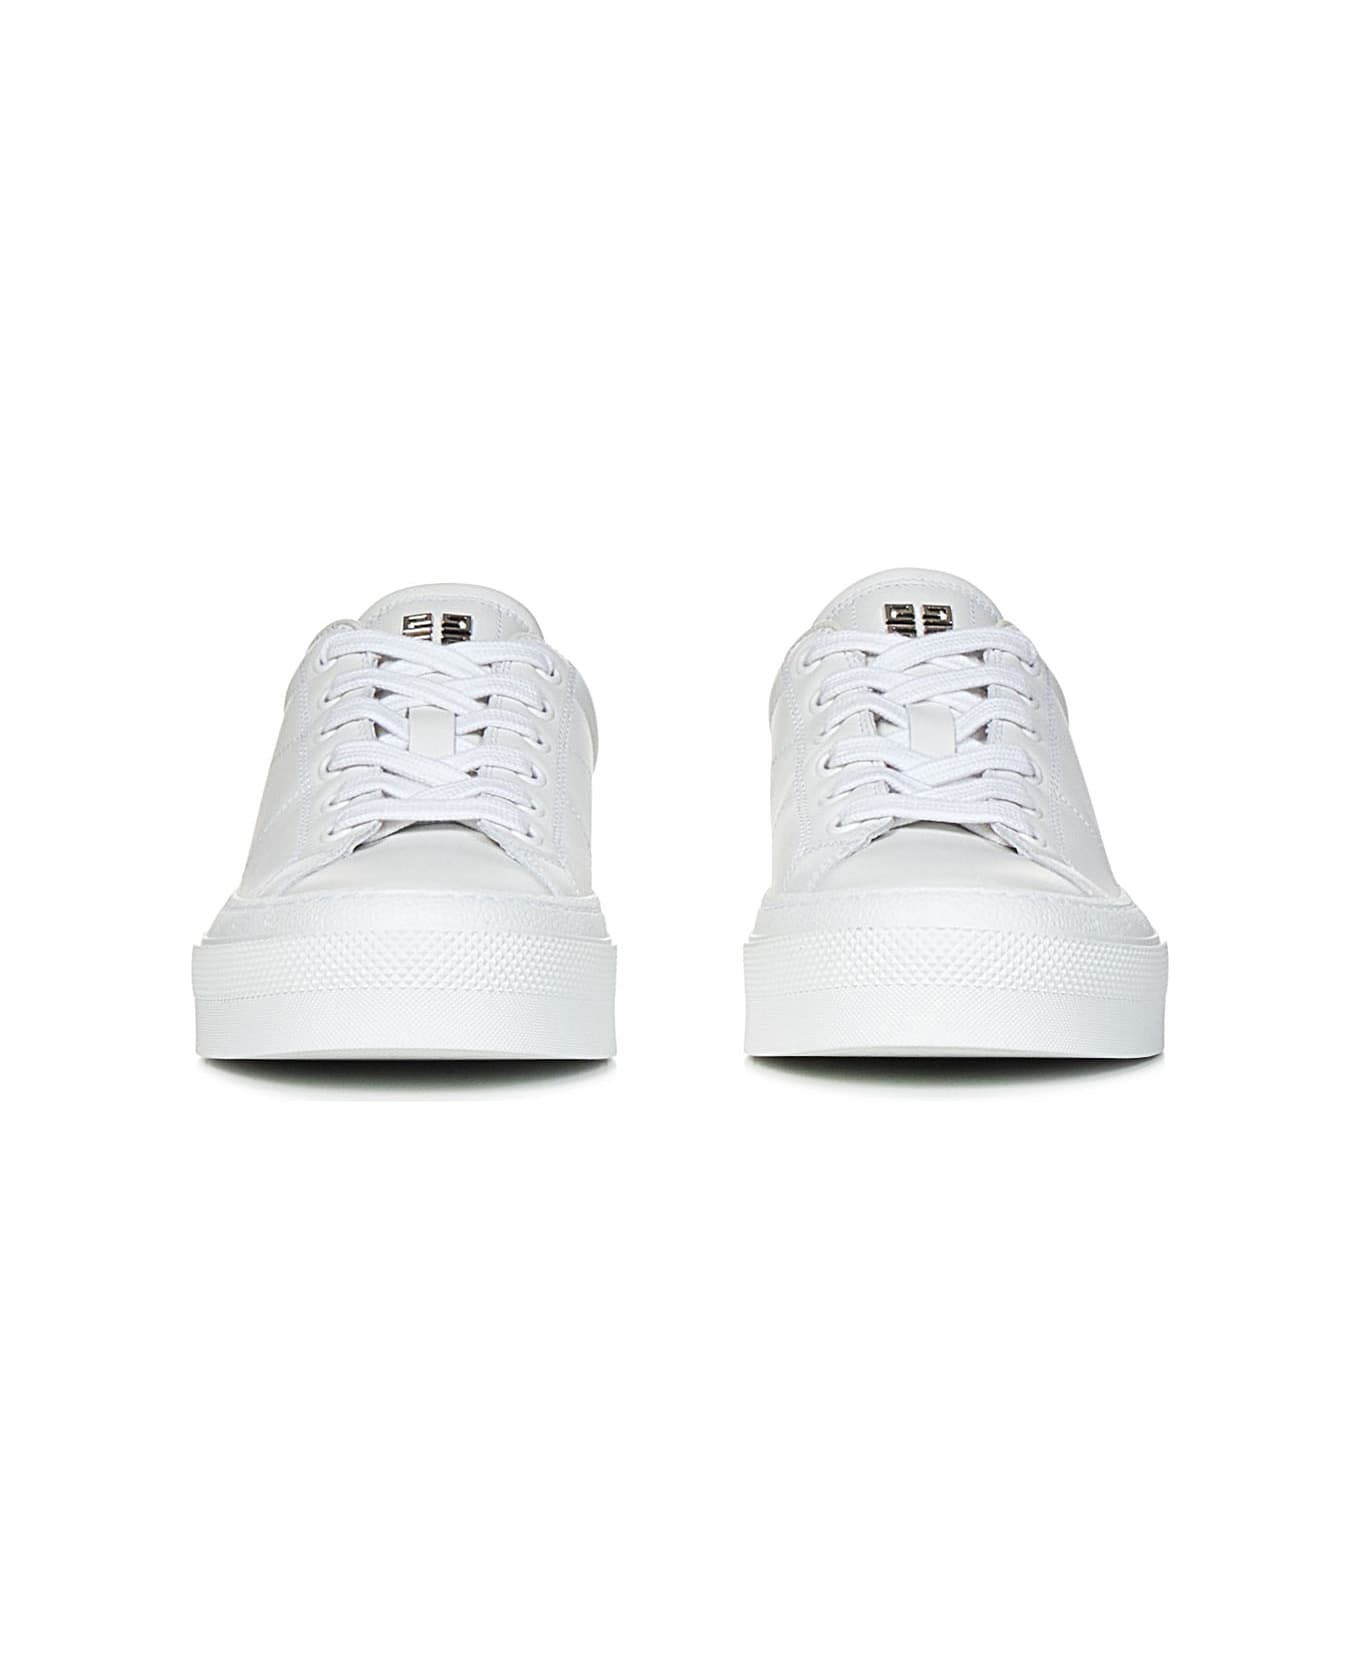 Givenchy City Sport Sneakers - white スニーカー